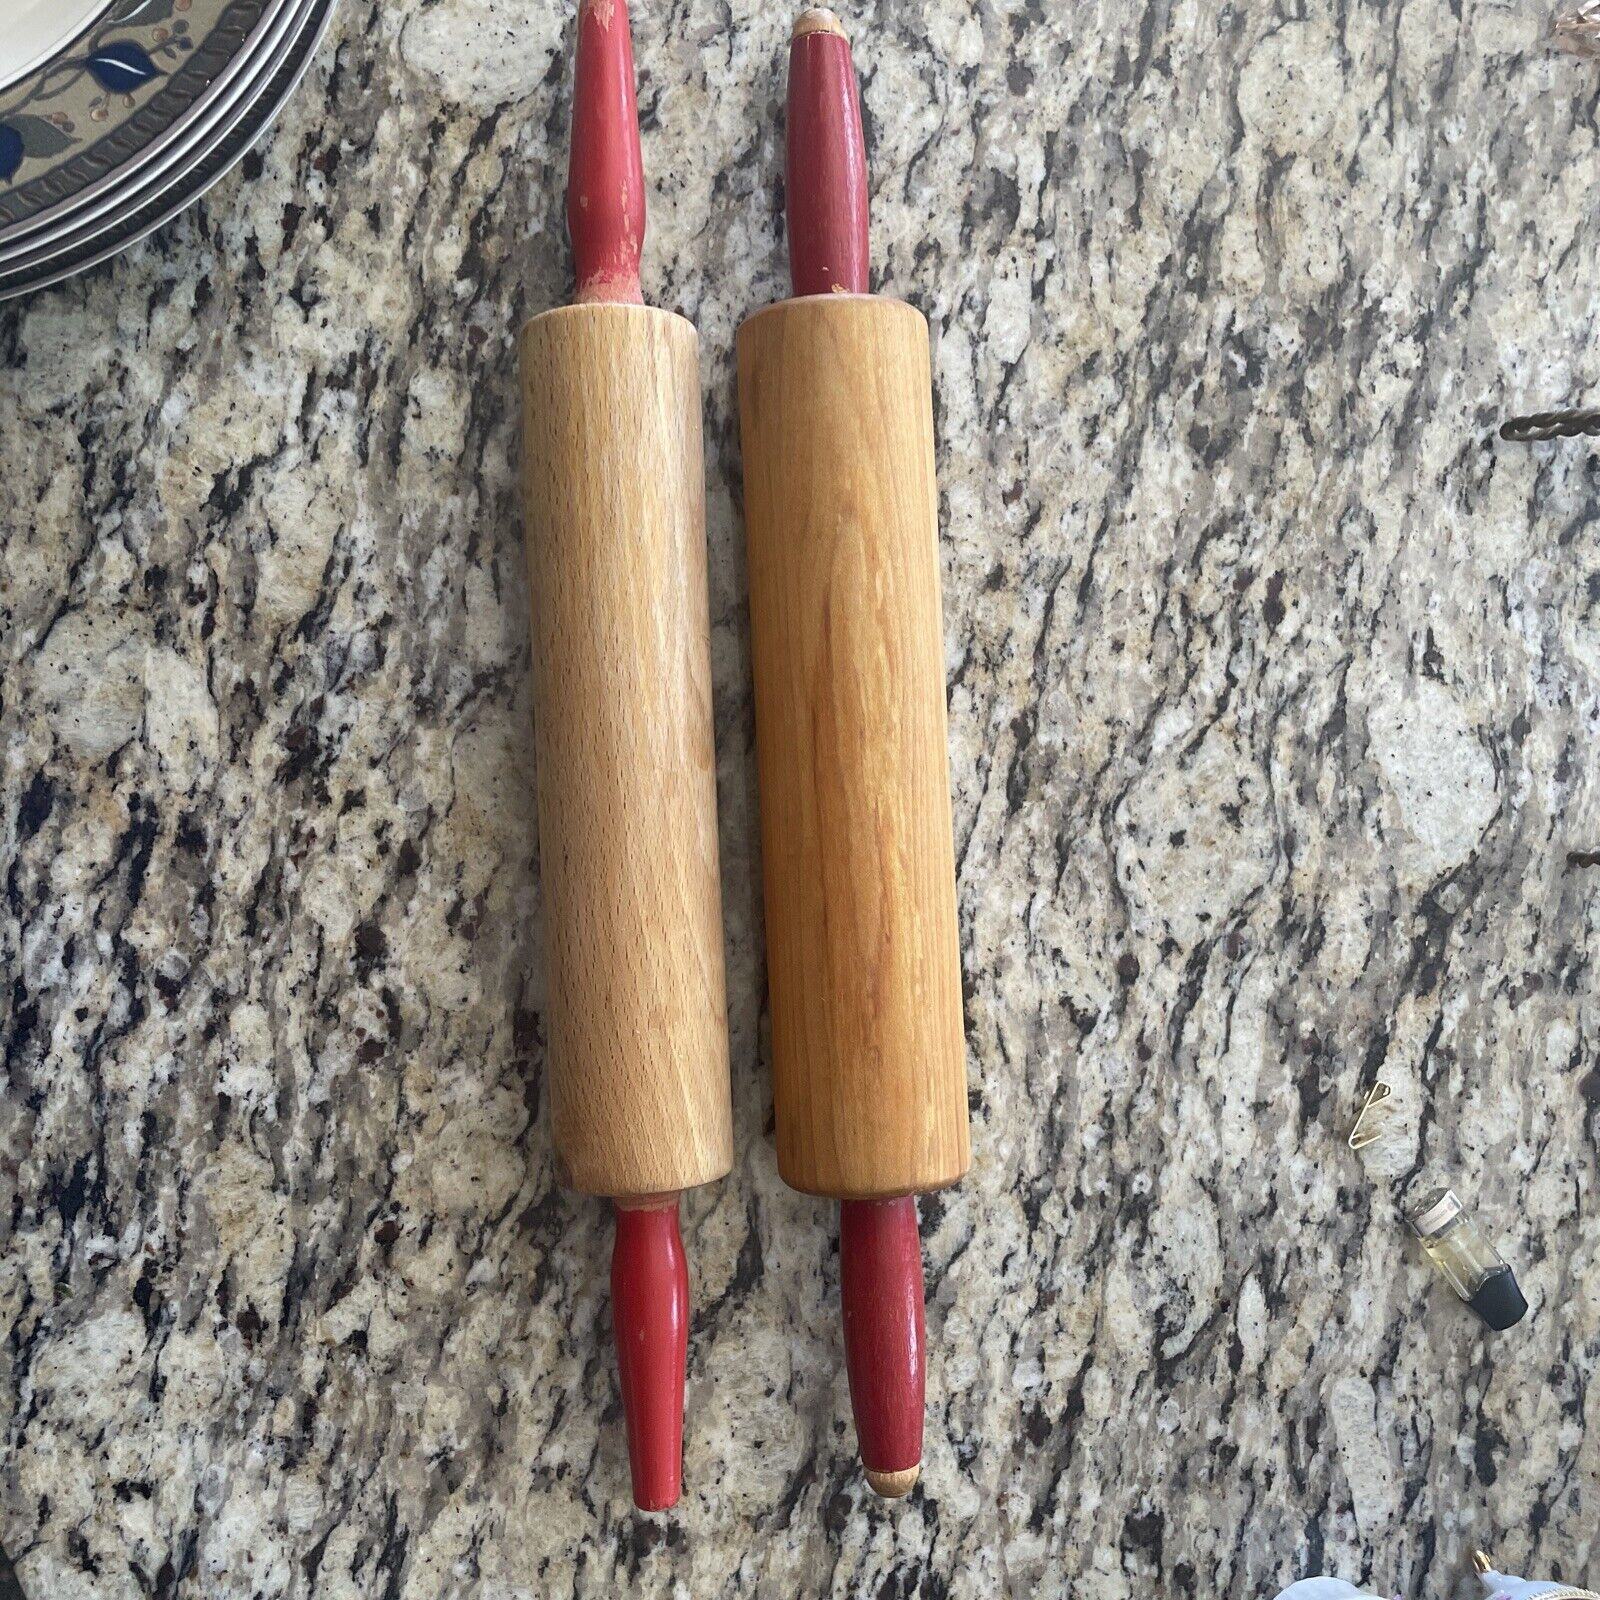 Lot of 2 Vintage Wood Rolling Pin with Red Handles Rustic Country Farmhouse